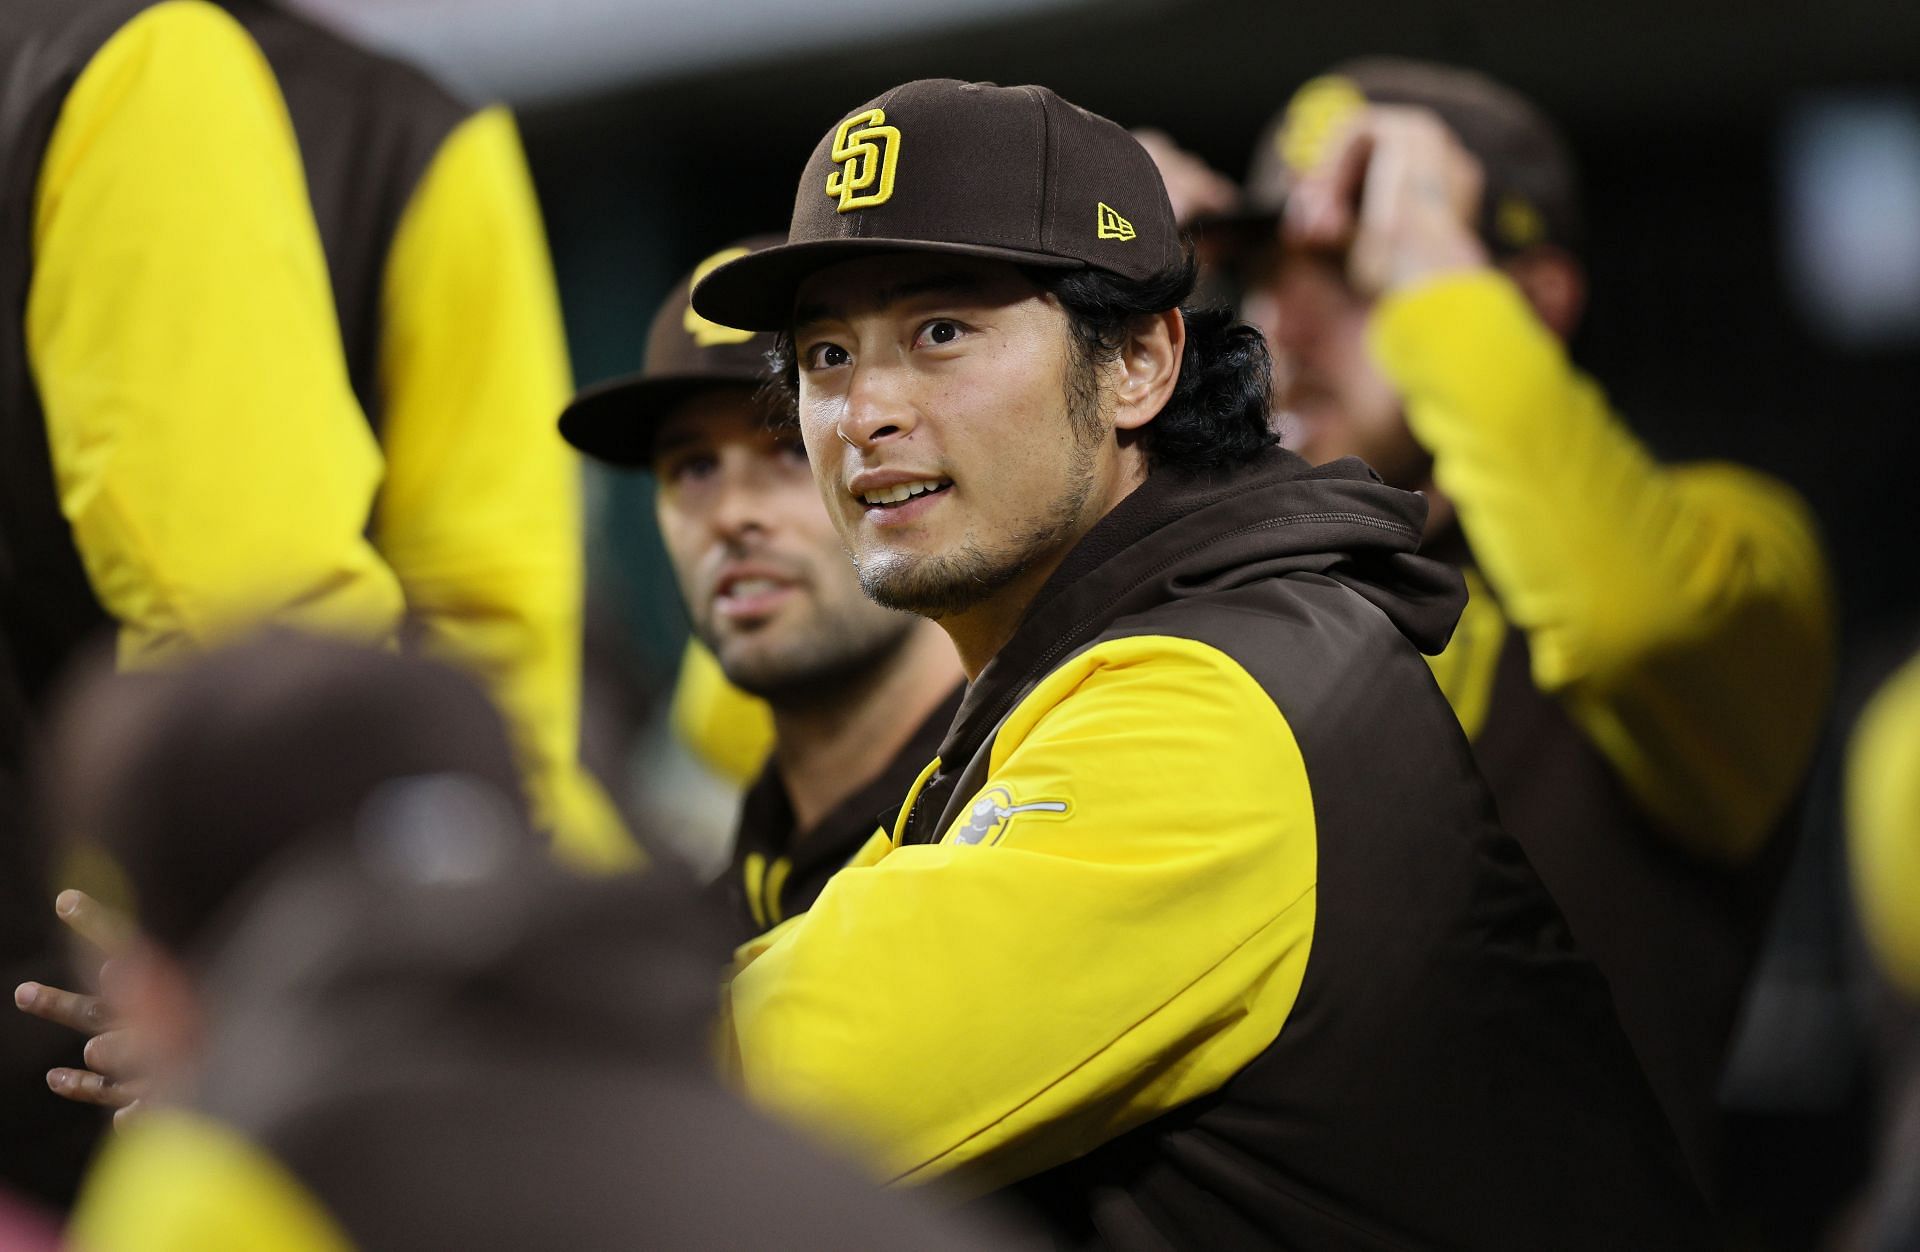 Reminds me of a duck with ducklings Anything Yu can do, I can do better  - San Diego Padres bullpen mimics Yu Darvish, fans react to the wholesome  moment